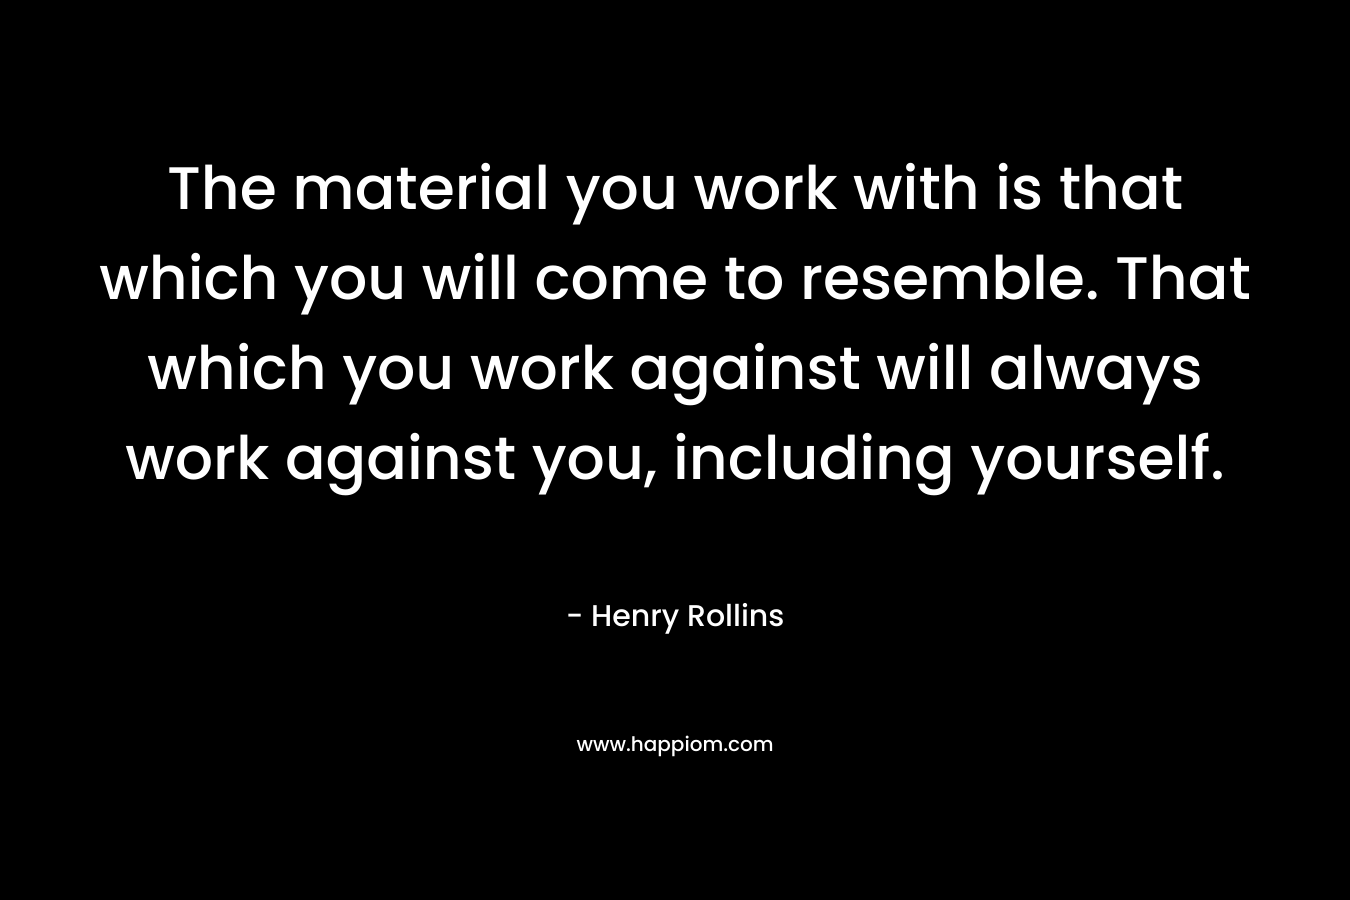 The material you work with is that which you will come to resemble. That which you work against will always work against you, including yourself. – Henry Rollins